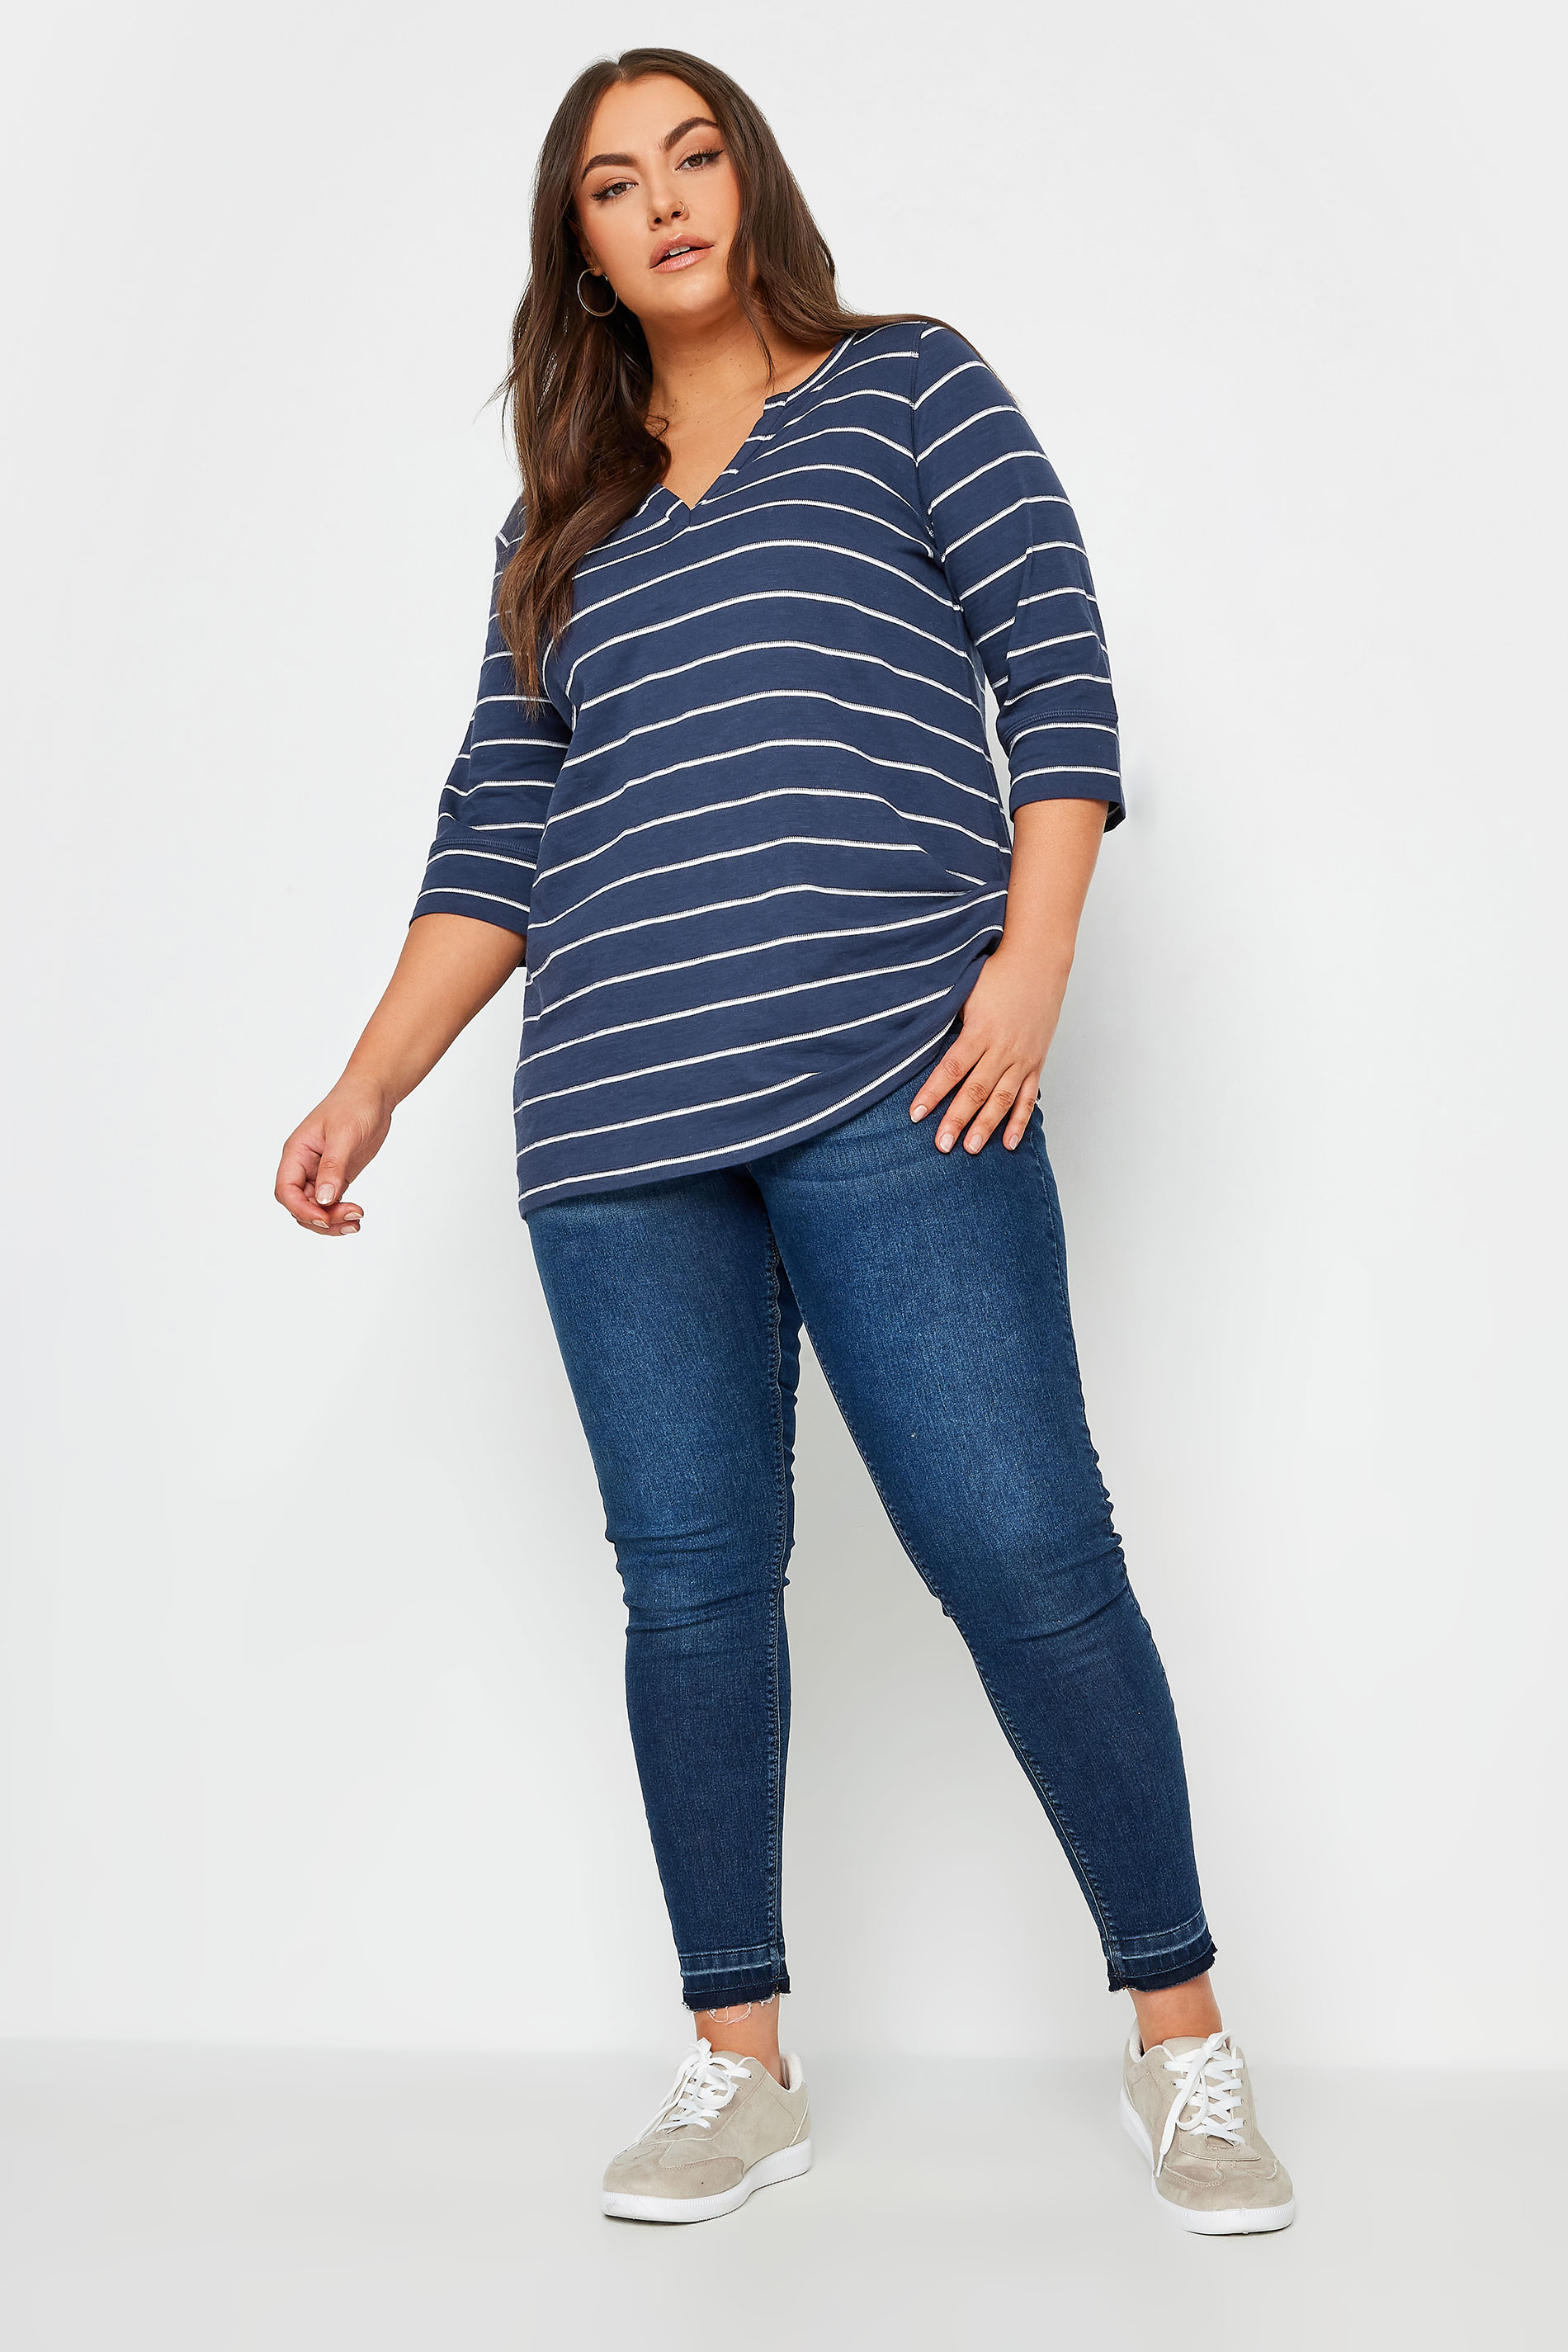 YOURS Plus Size Blue & White Stripe Notch Neck Top | Yours Clothing 2